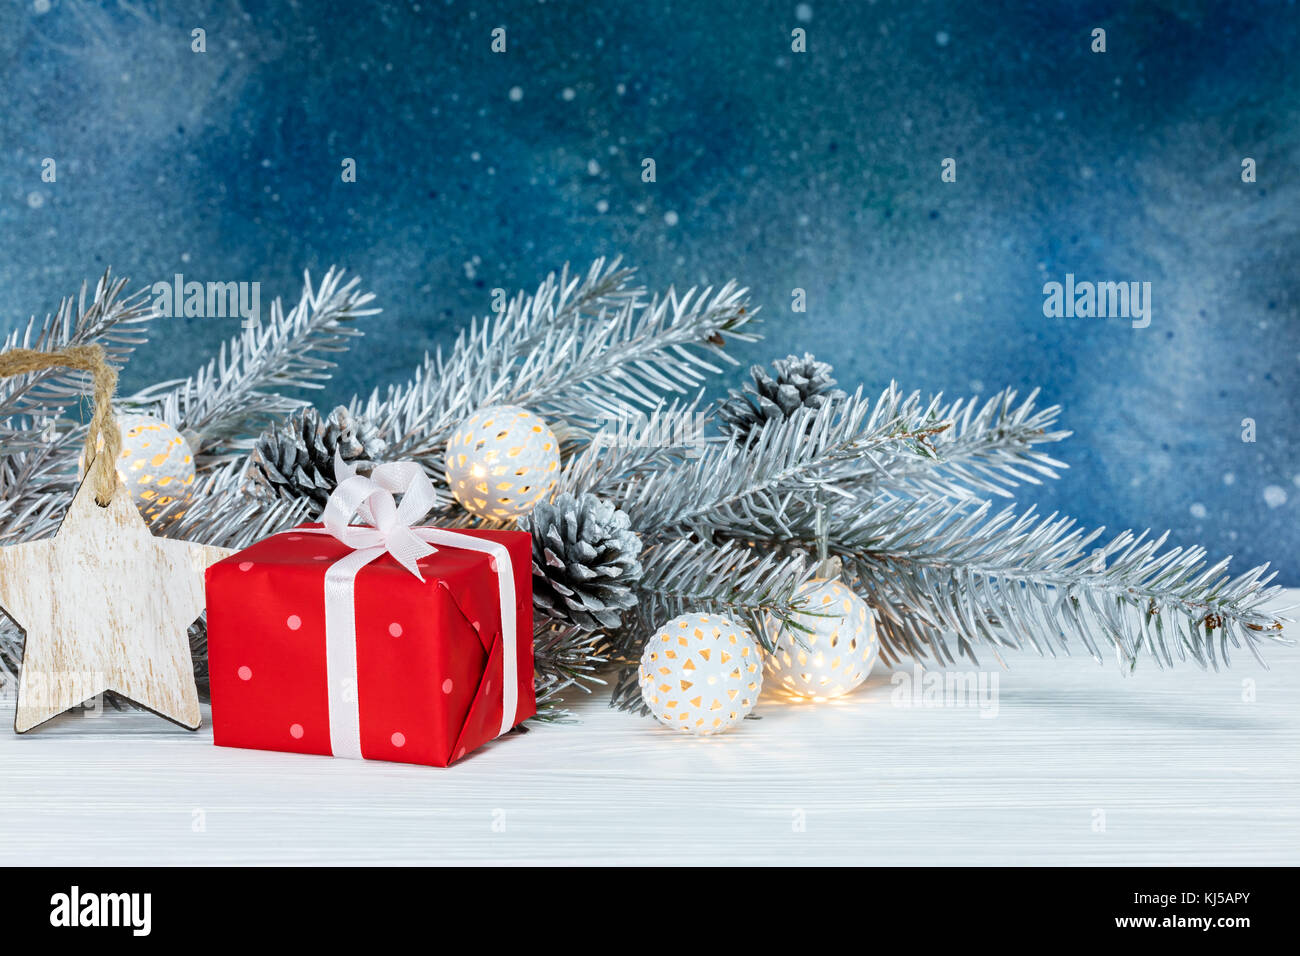 fir tree branch with light garlands, christmas decorations and gift box on blue background Stock Photo